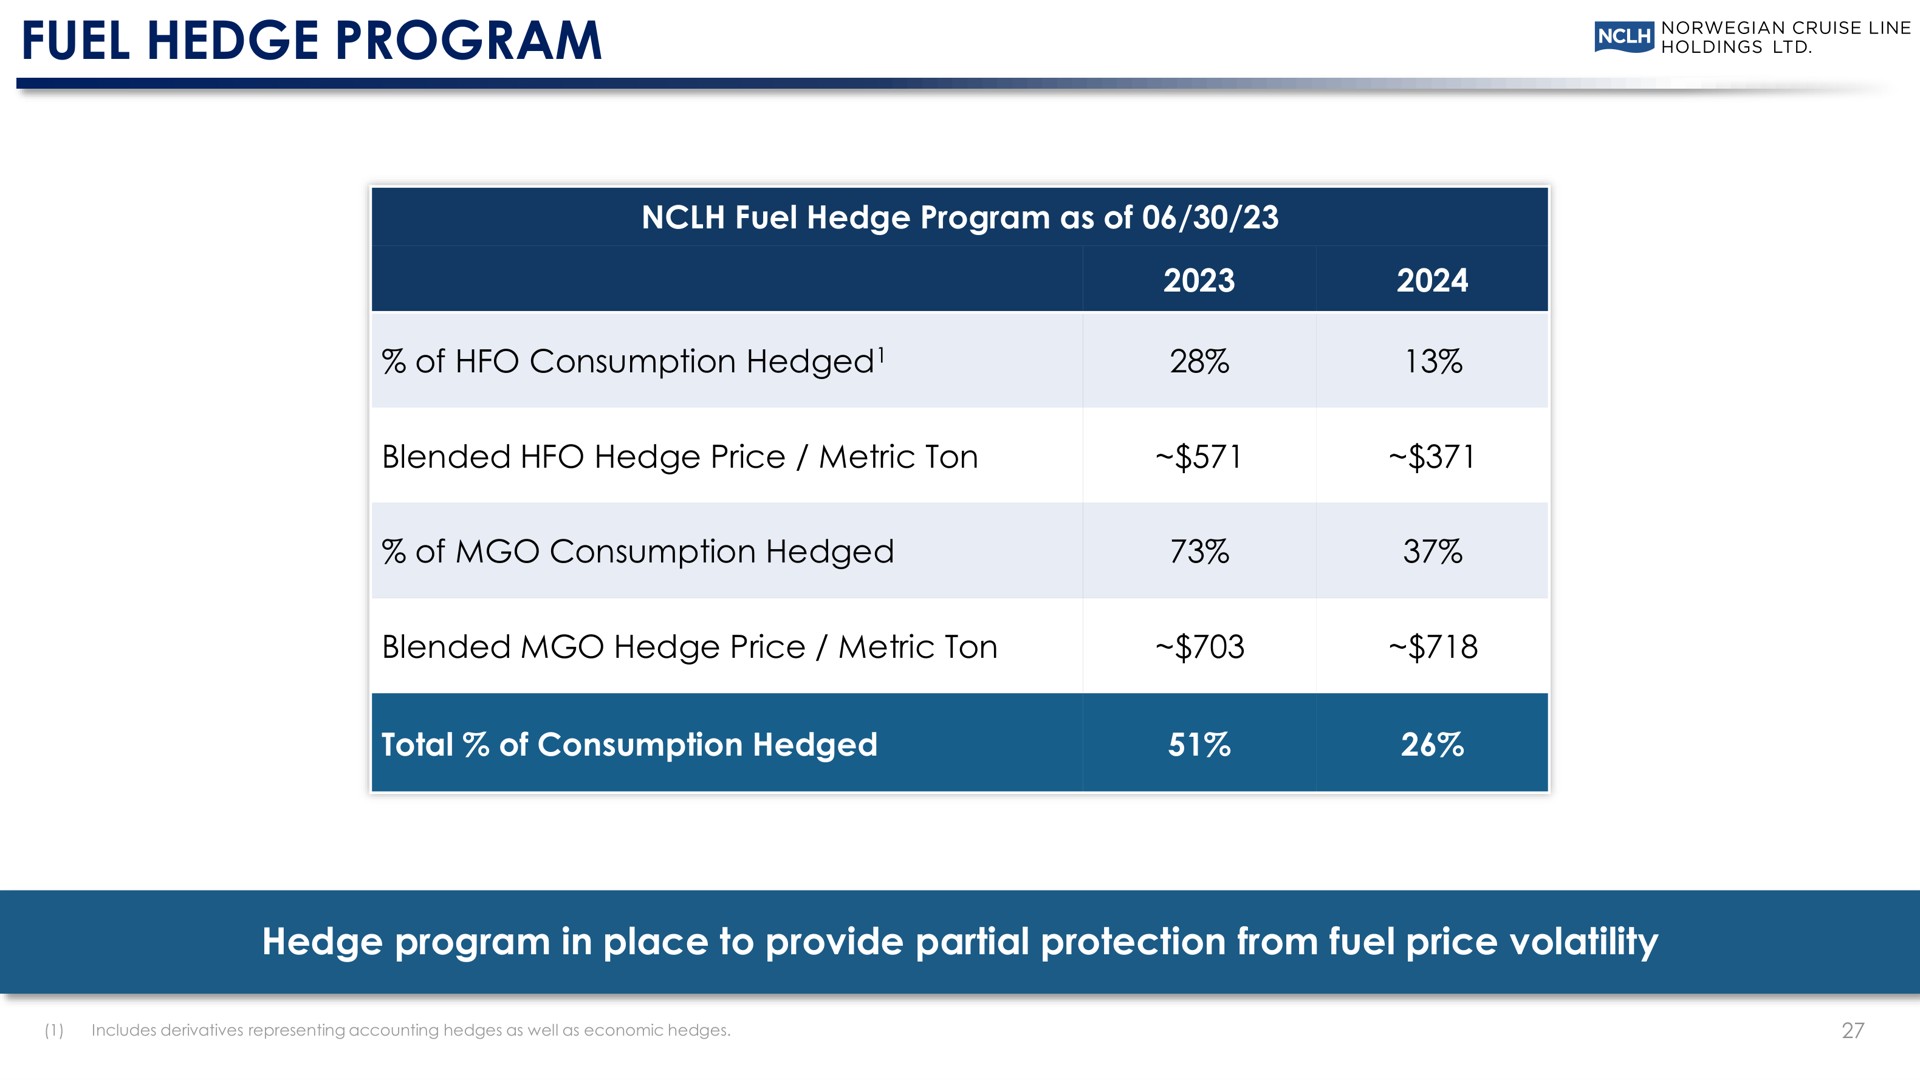 fuel hedge program hedge program in place to provide partial protection from fuel price volatility nor cruise line | Norwegian Cruise Line